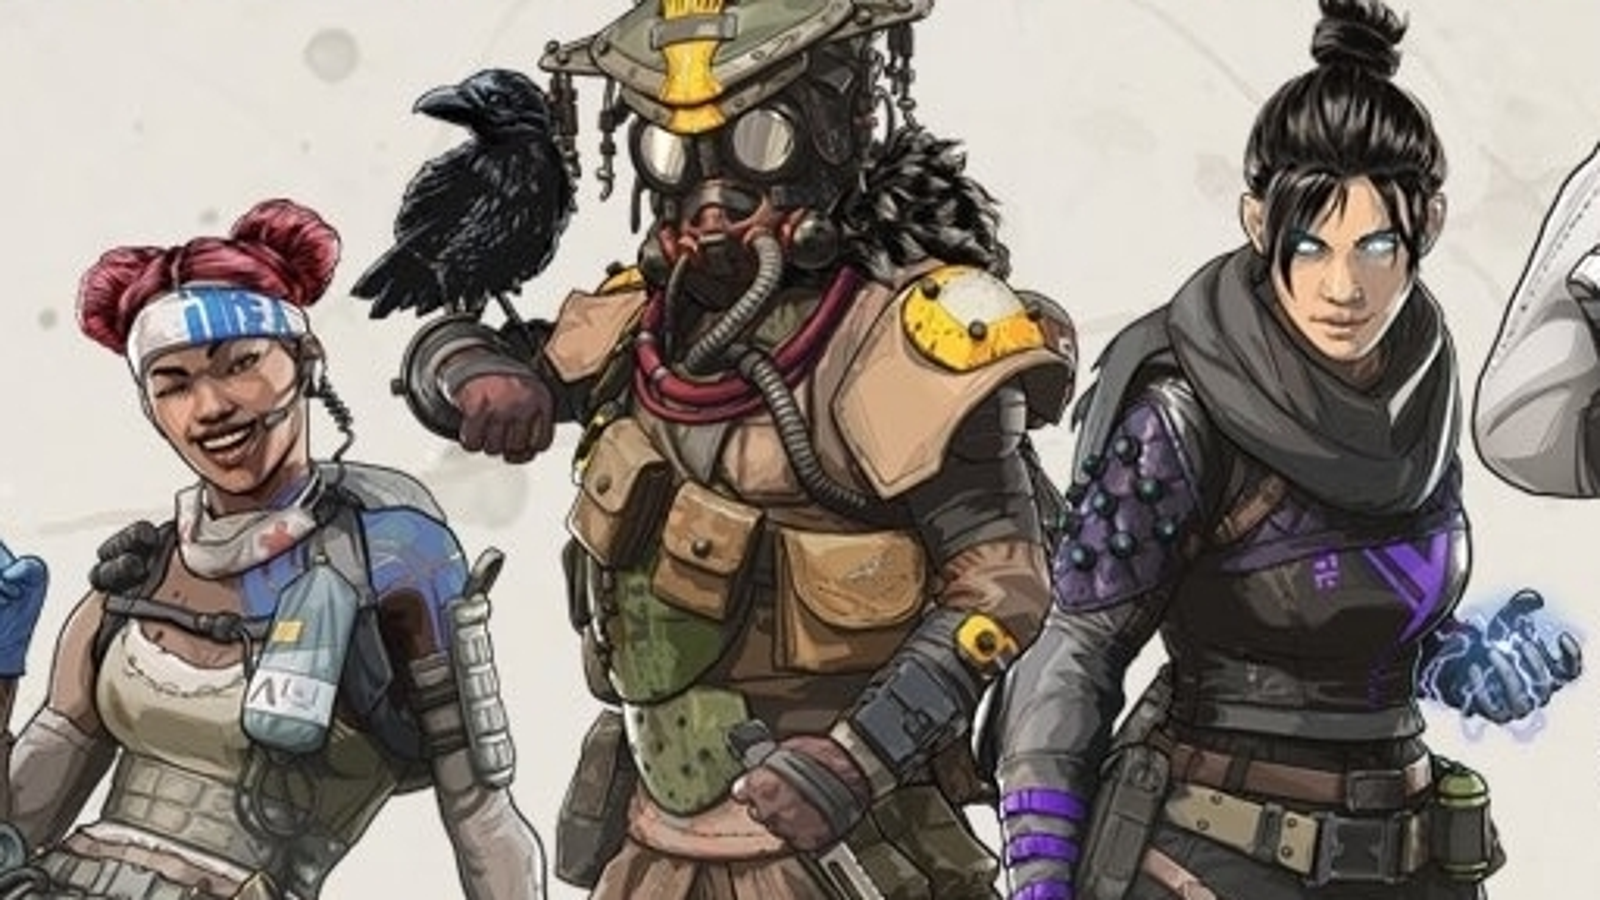 Don't worry about PC crossplay, says Apex Legends dev - console players  won't get matched with PC lobbies